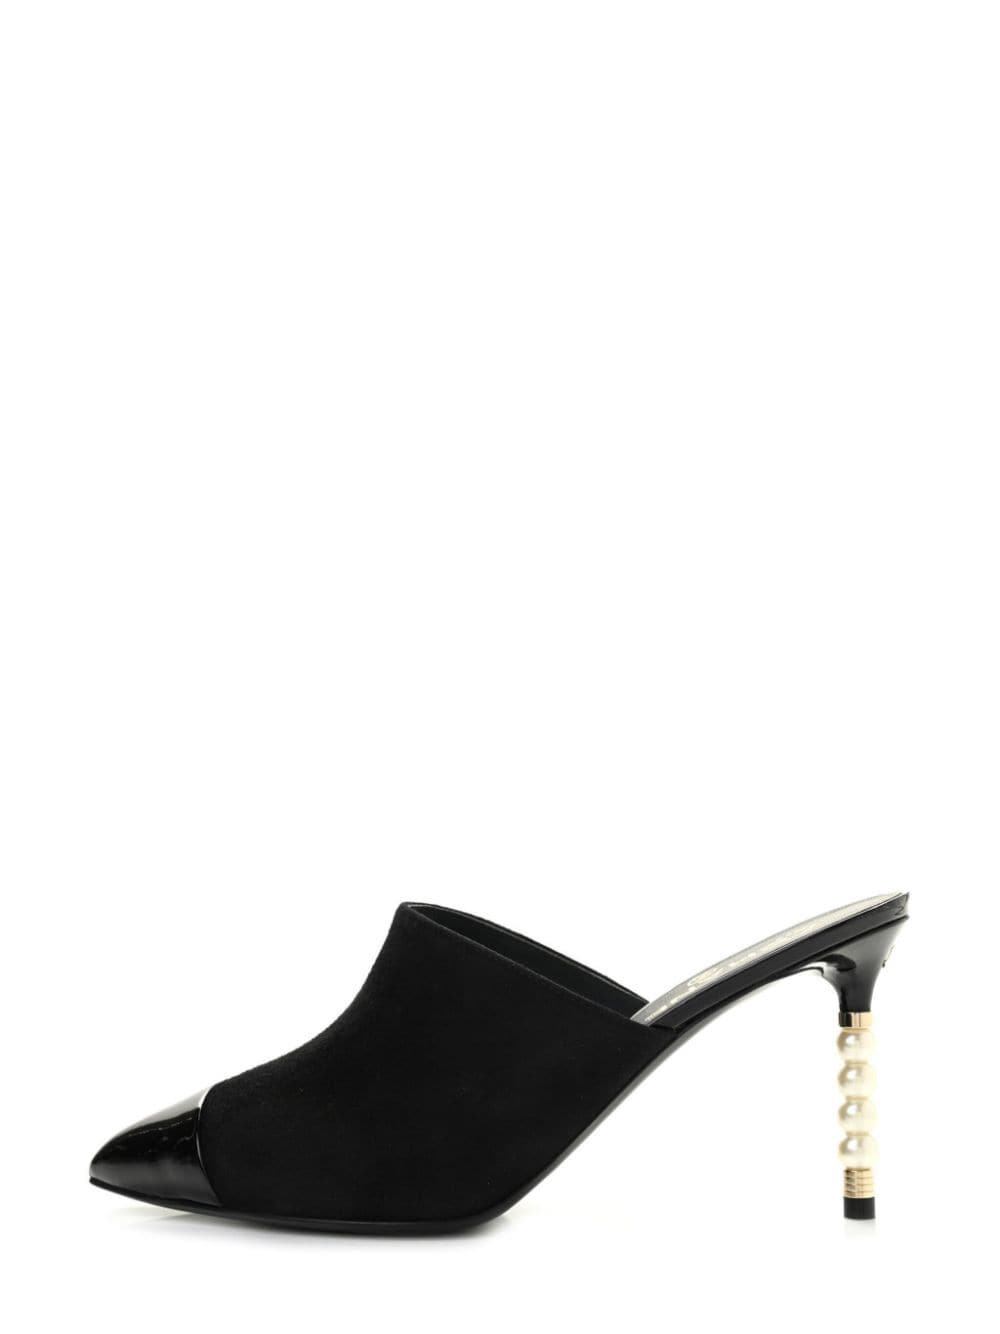 CHANEL Pre-Owned faux-pearl heels mules - Black